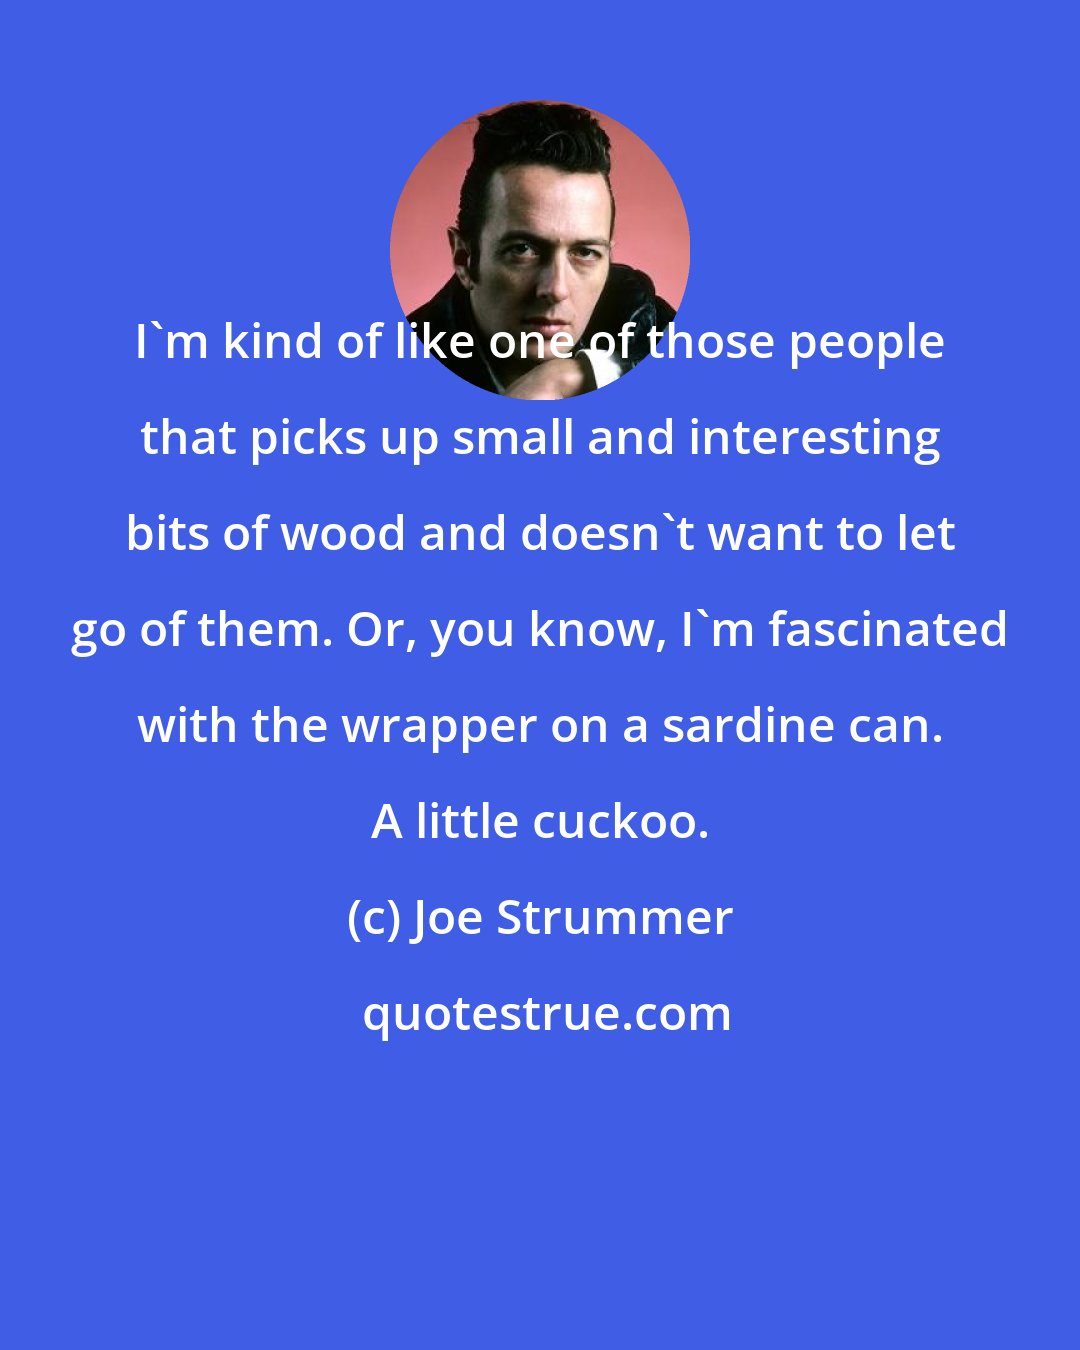 Joe Strummer: I`m kind of like one of those people that picks up small and interesting bits of wood and doesn`t want to let go of them. Or, you know, I`m fascinated with the wrapper on a sardine can. A little cuckoo.